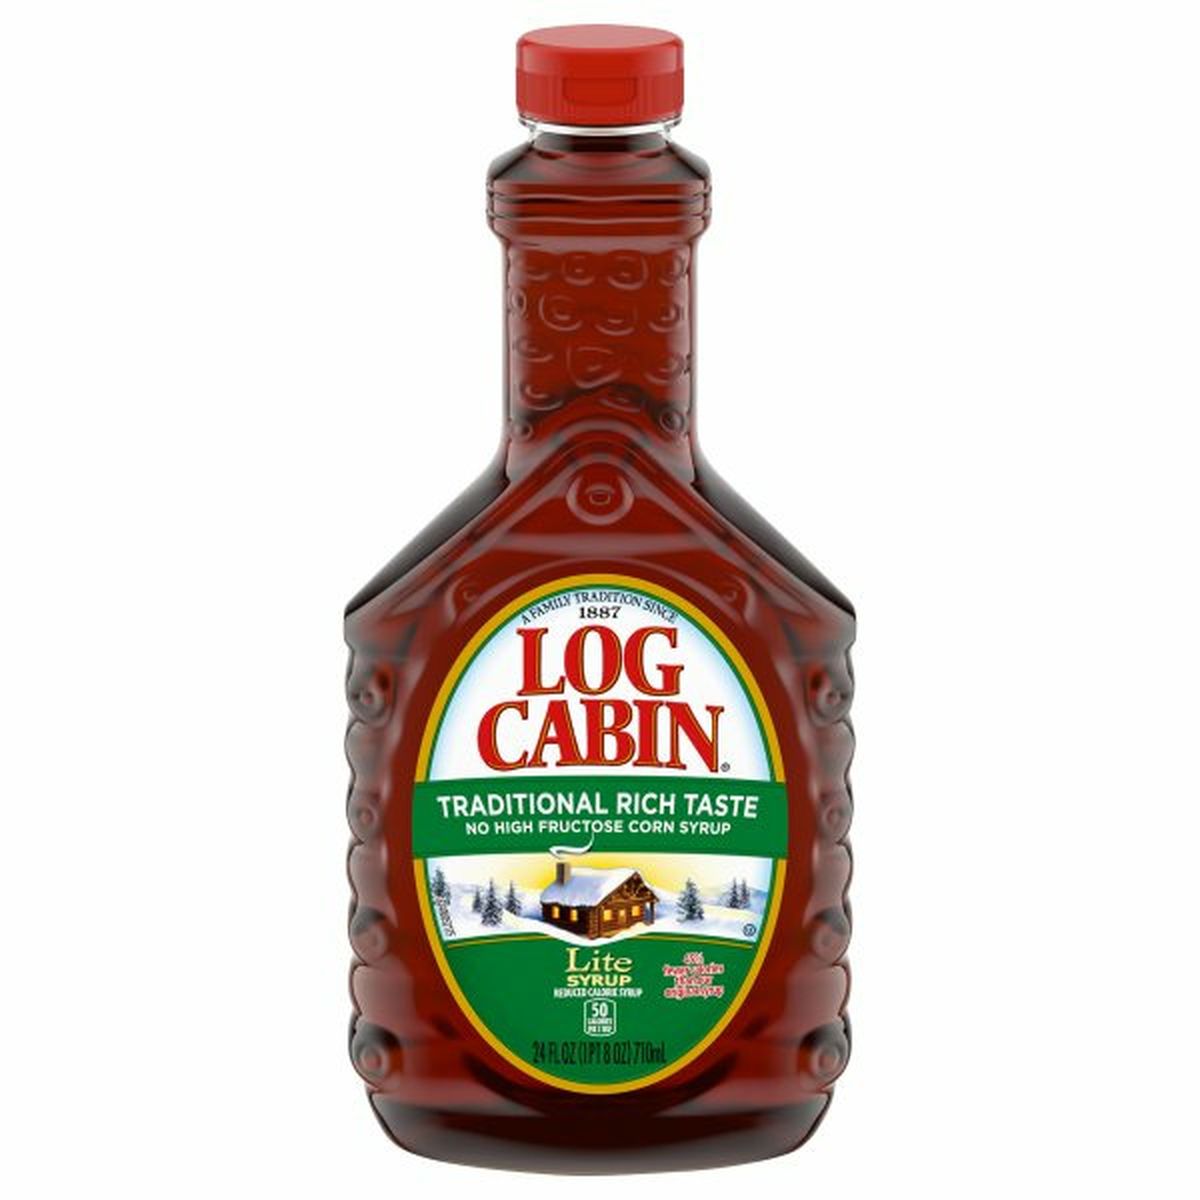 Calories in Log Cabin Syrup, Lite